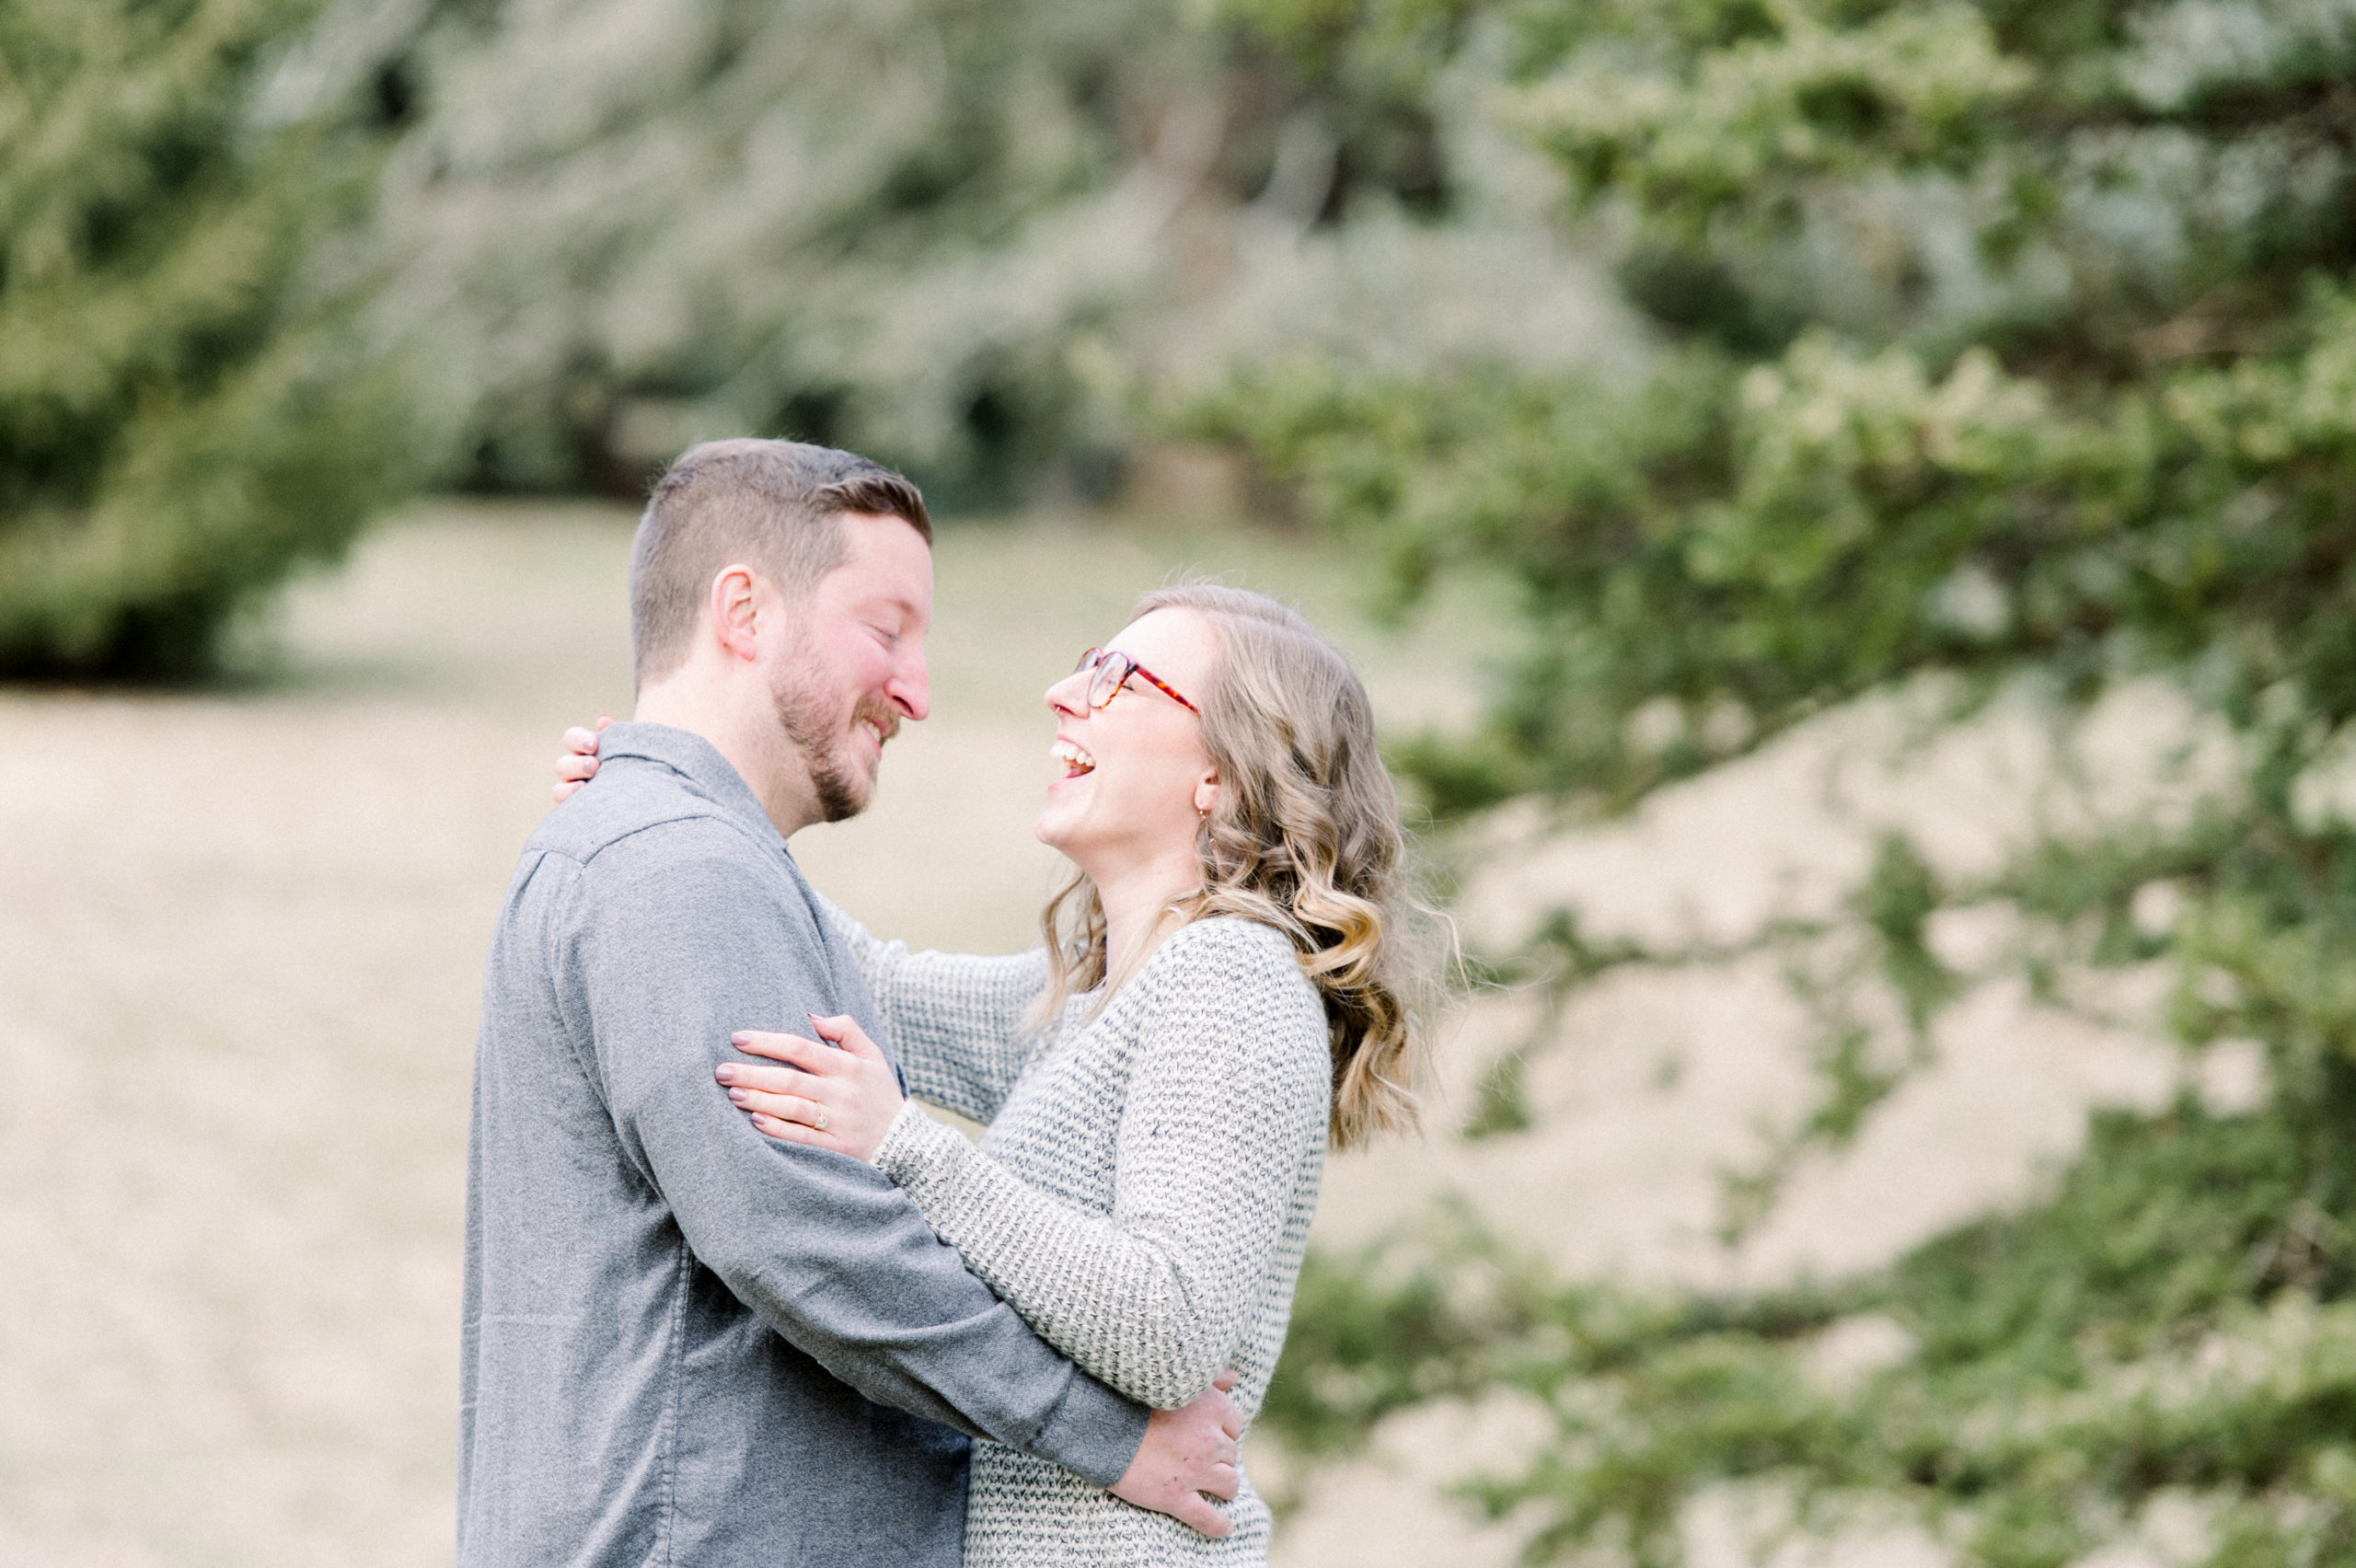 winter engagement session tips couple at arboretum in front of evergreen trees